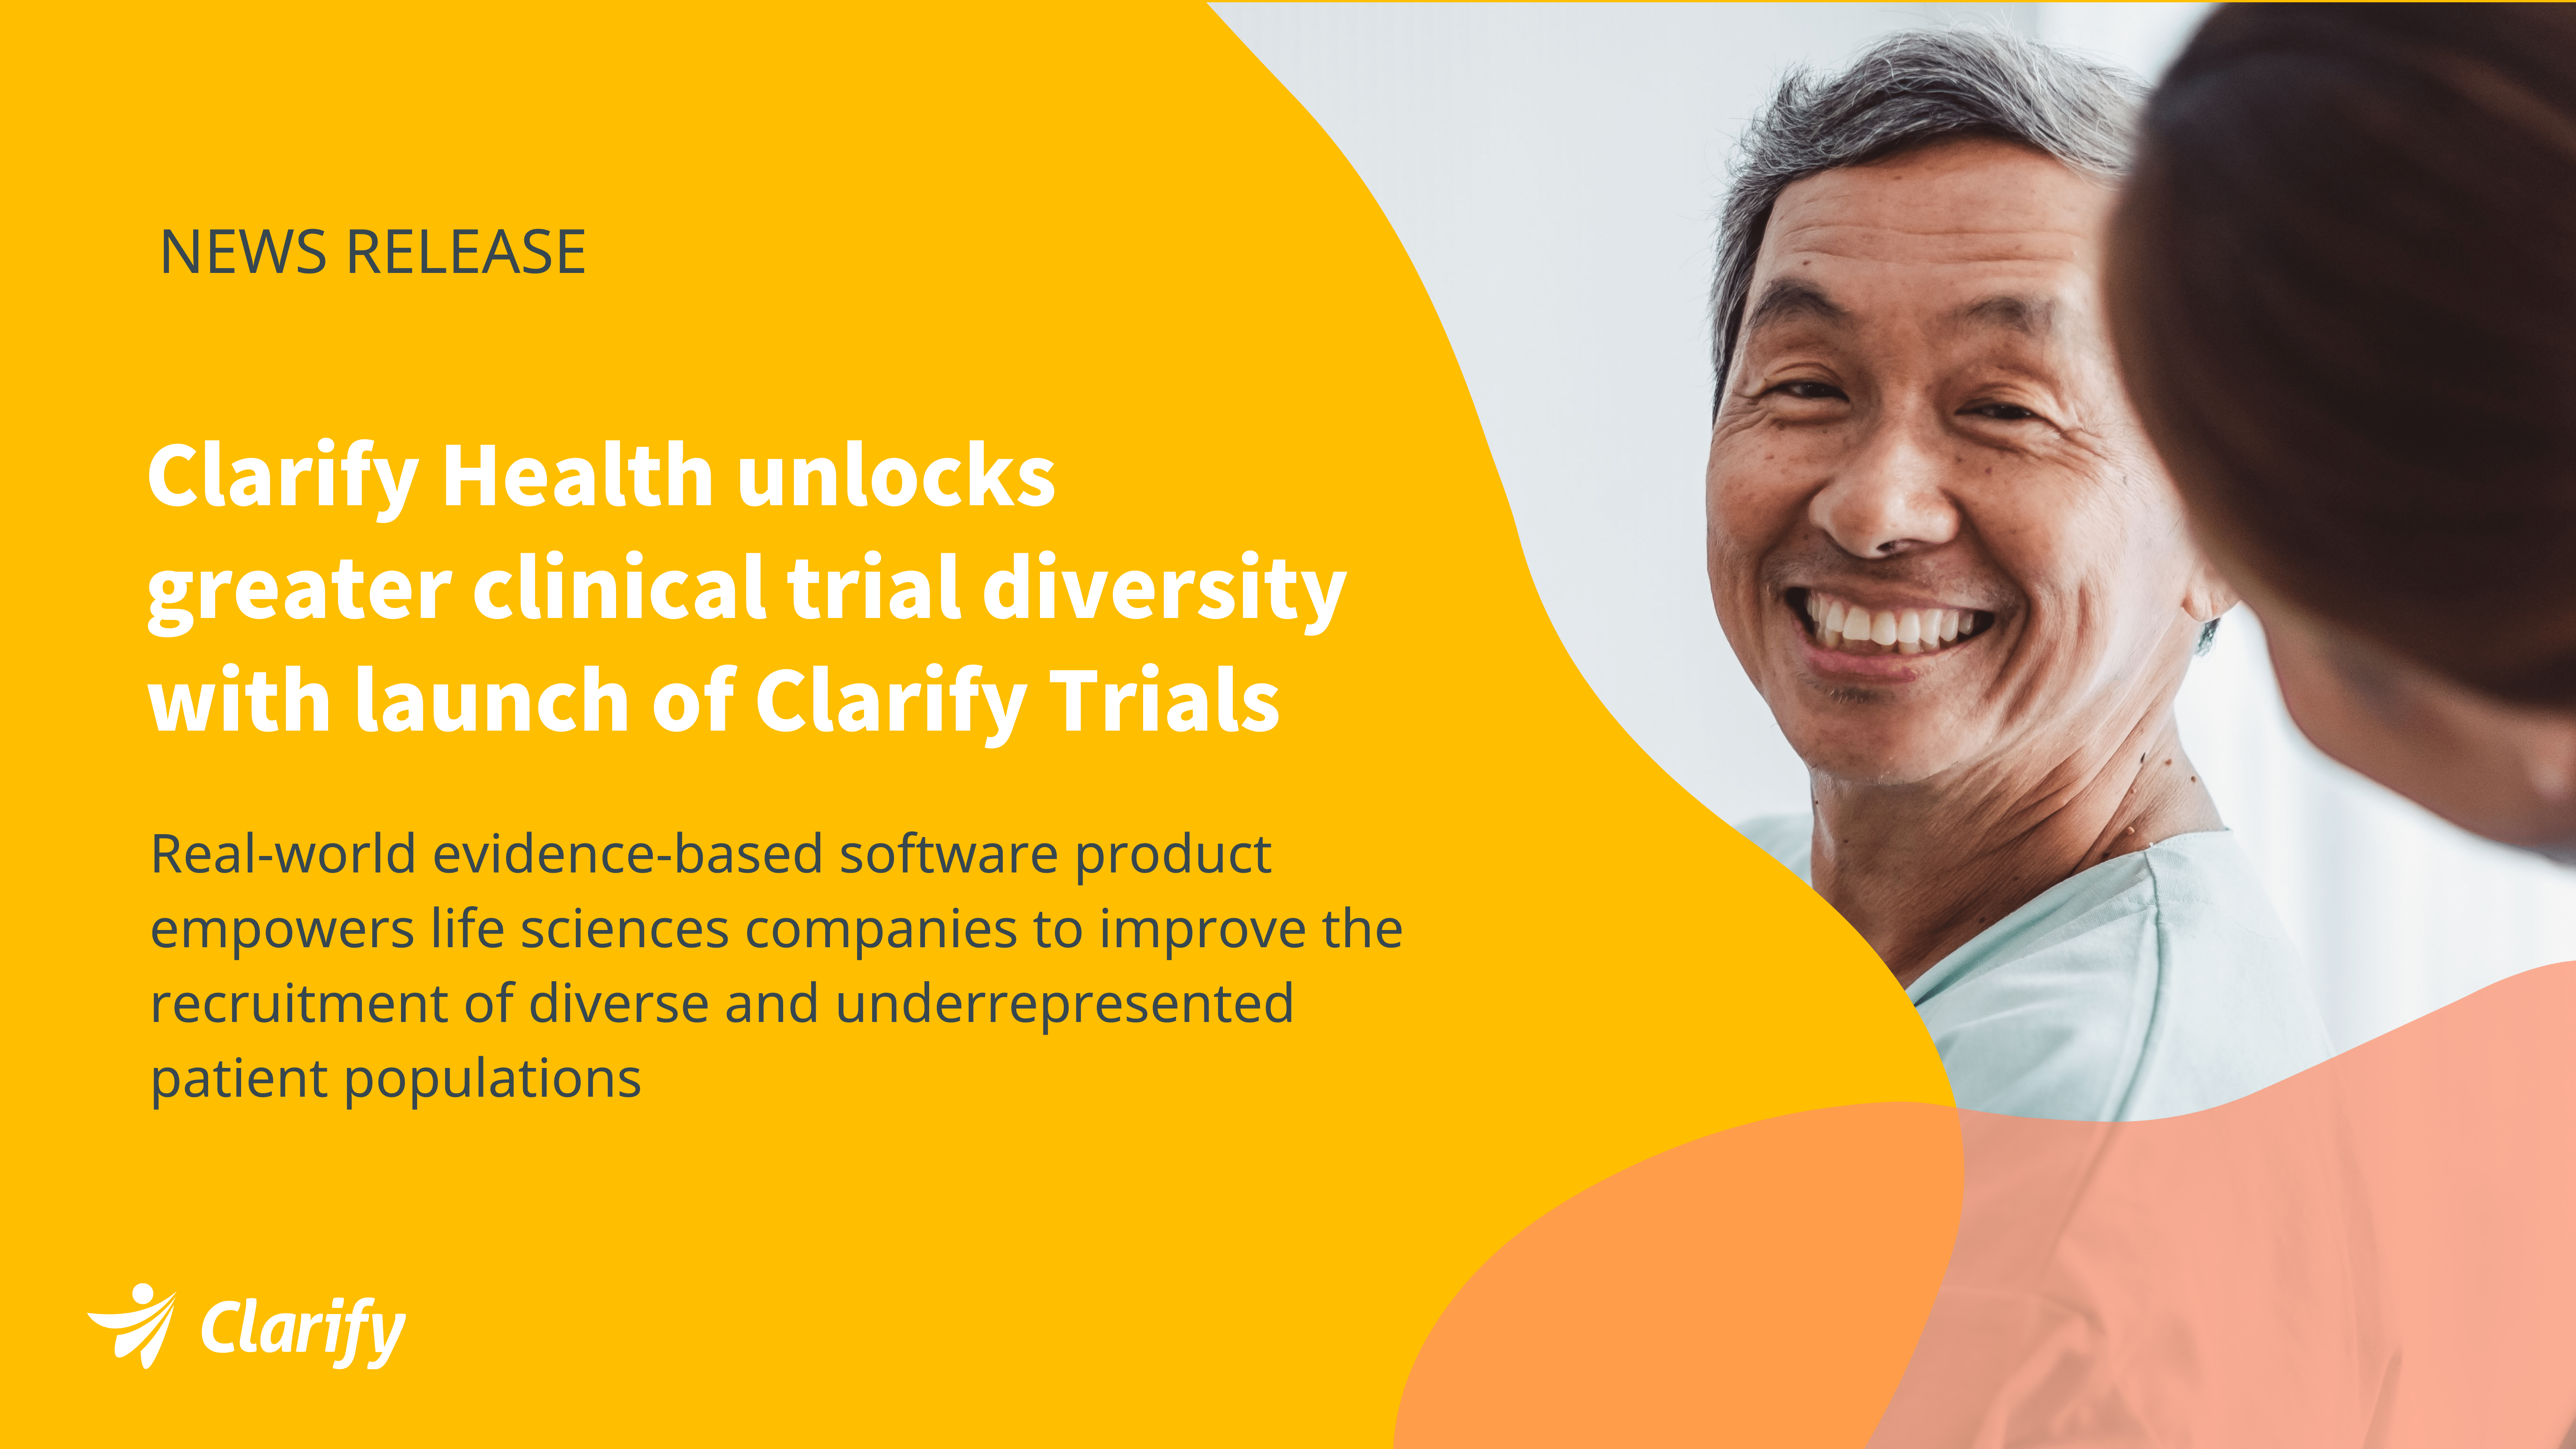 Thumbnail for News release: Clarify Health unlocks greater clinical trial diversity with launch of Clarify Trials